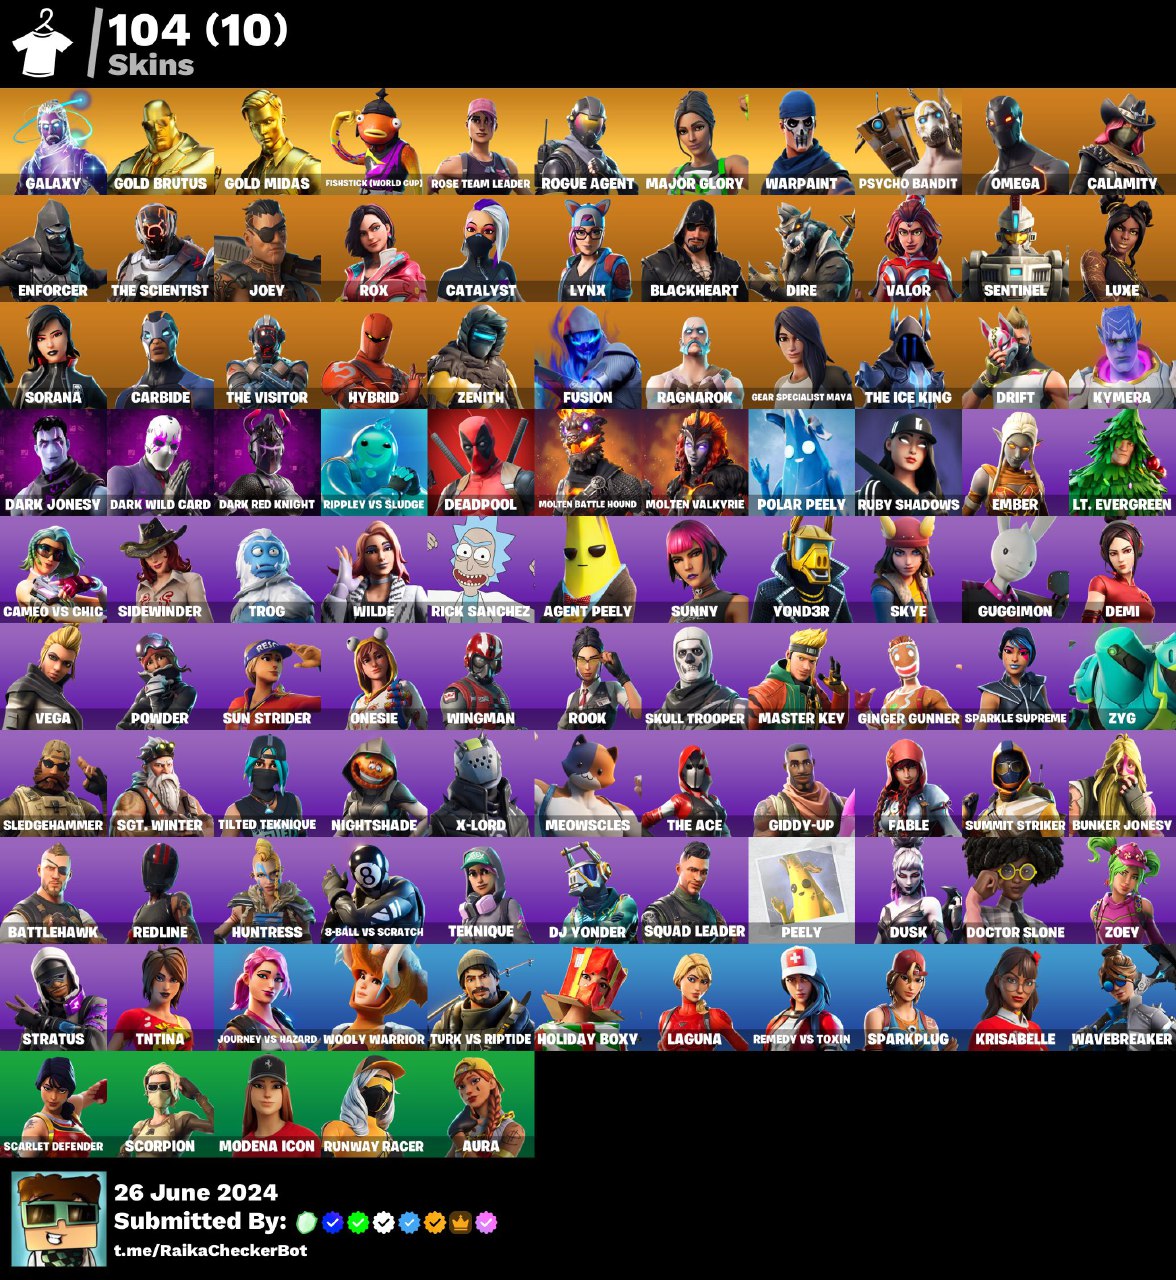 Fa [PC / Xbox] 104 skins | Galaxy, Merry Mint axe, Golden Brutus, Golden Midas, agent voyou, Primary glory, esprit bandit